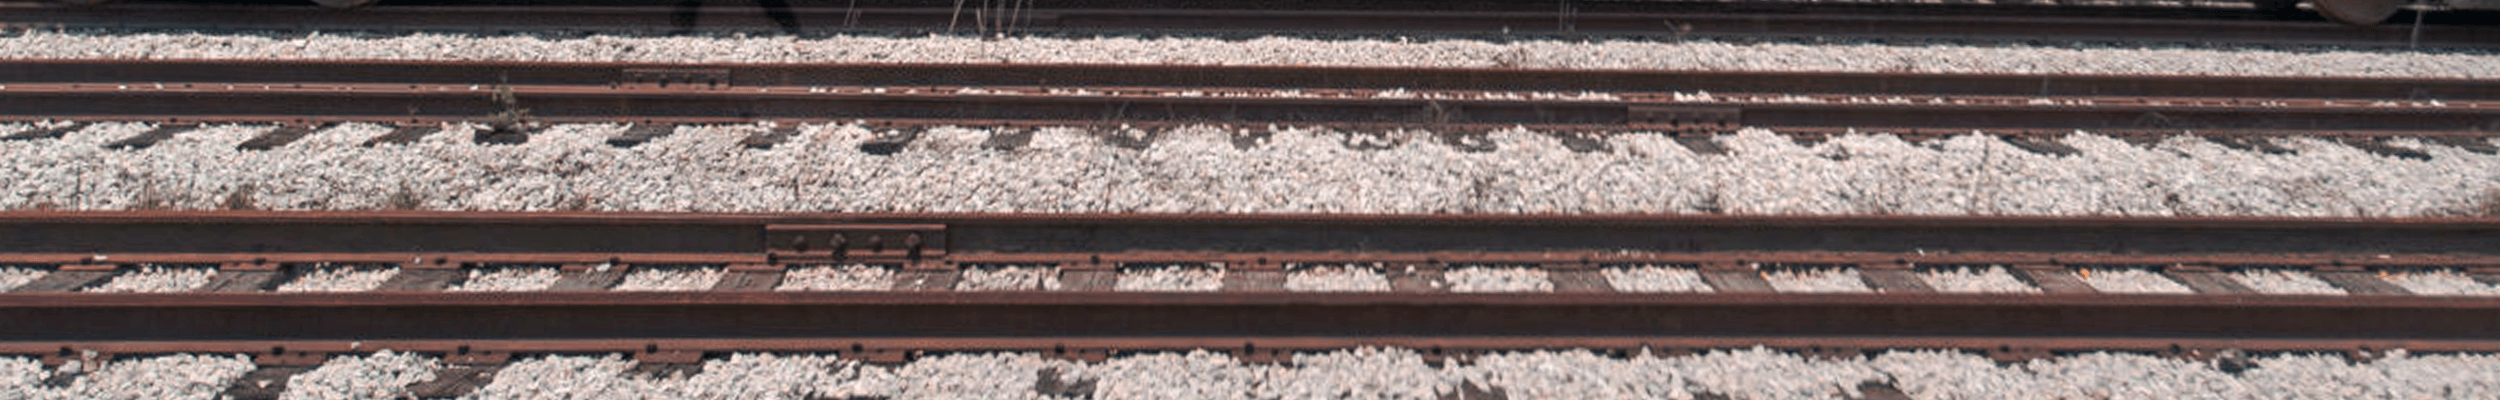 railcar industrial cleaning